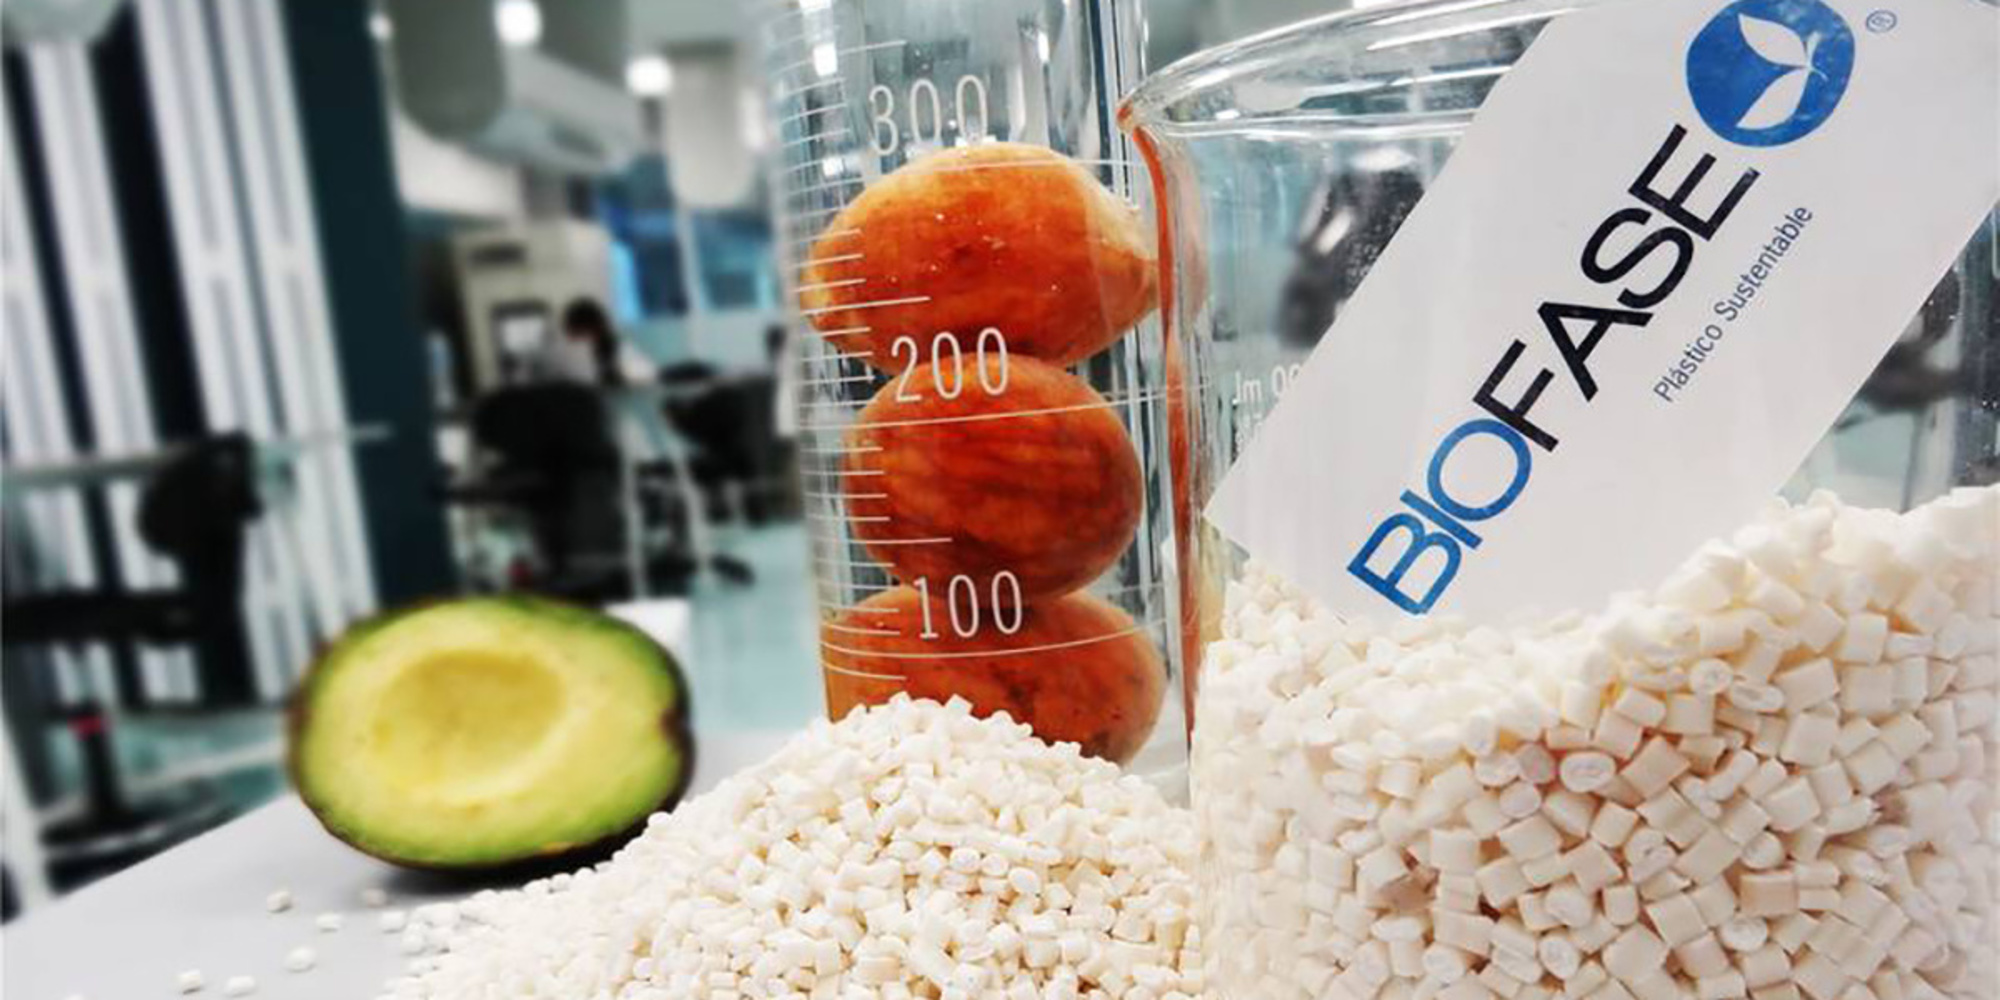 Jars filled with the biopolymer Biofase makes from discarded avocado pits. 